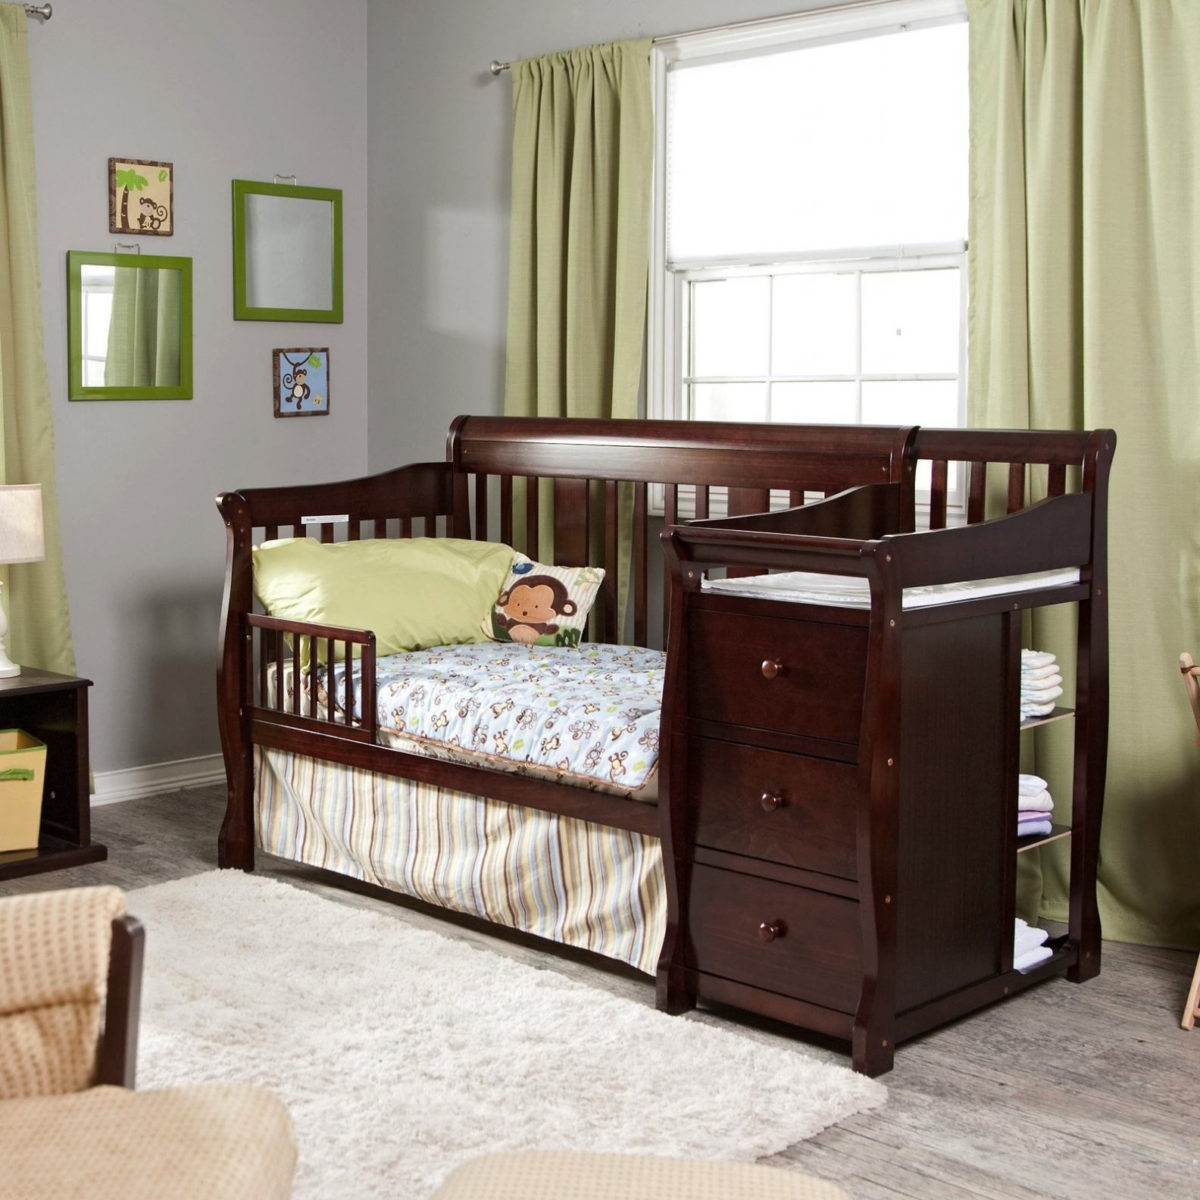 convertible baby cribs with changing table divine storkcraft portofino convertible crib changing table 04586 479 for YJPCINB